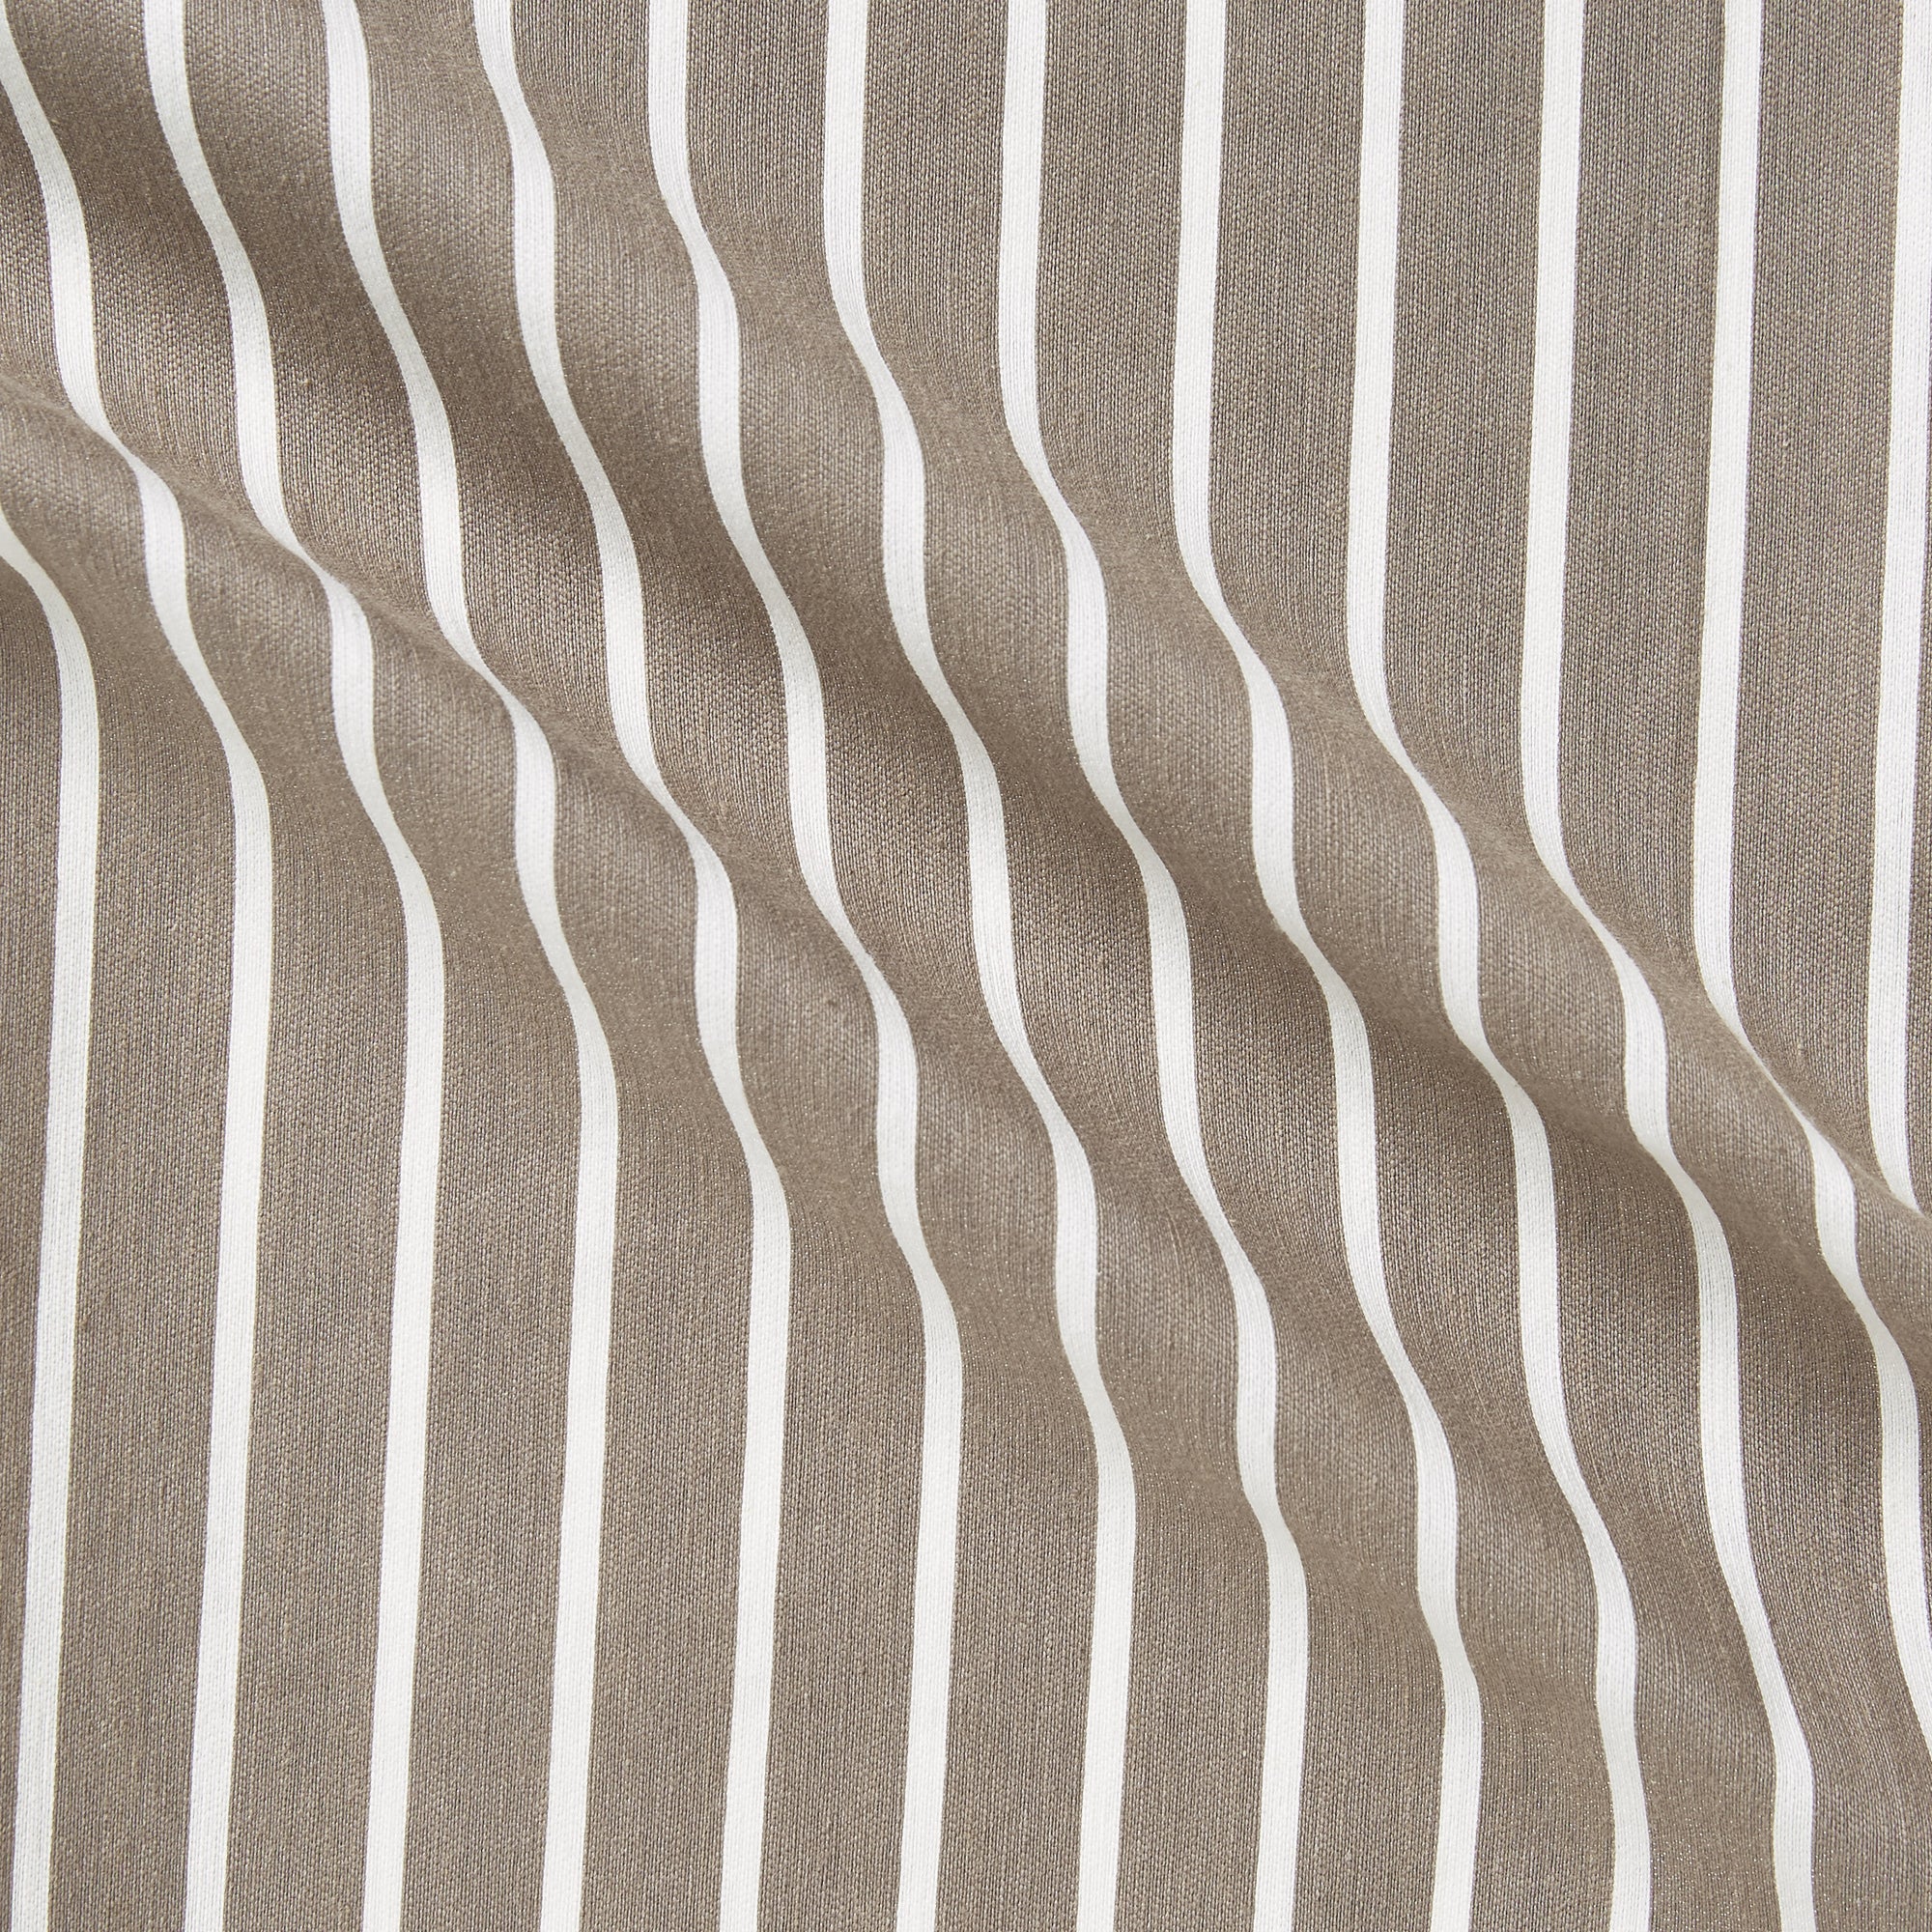 gatsby presenting the mocha color version of a classic  Butchers stripe, heavy weight Cotton and nylon blend featuring moderate drape